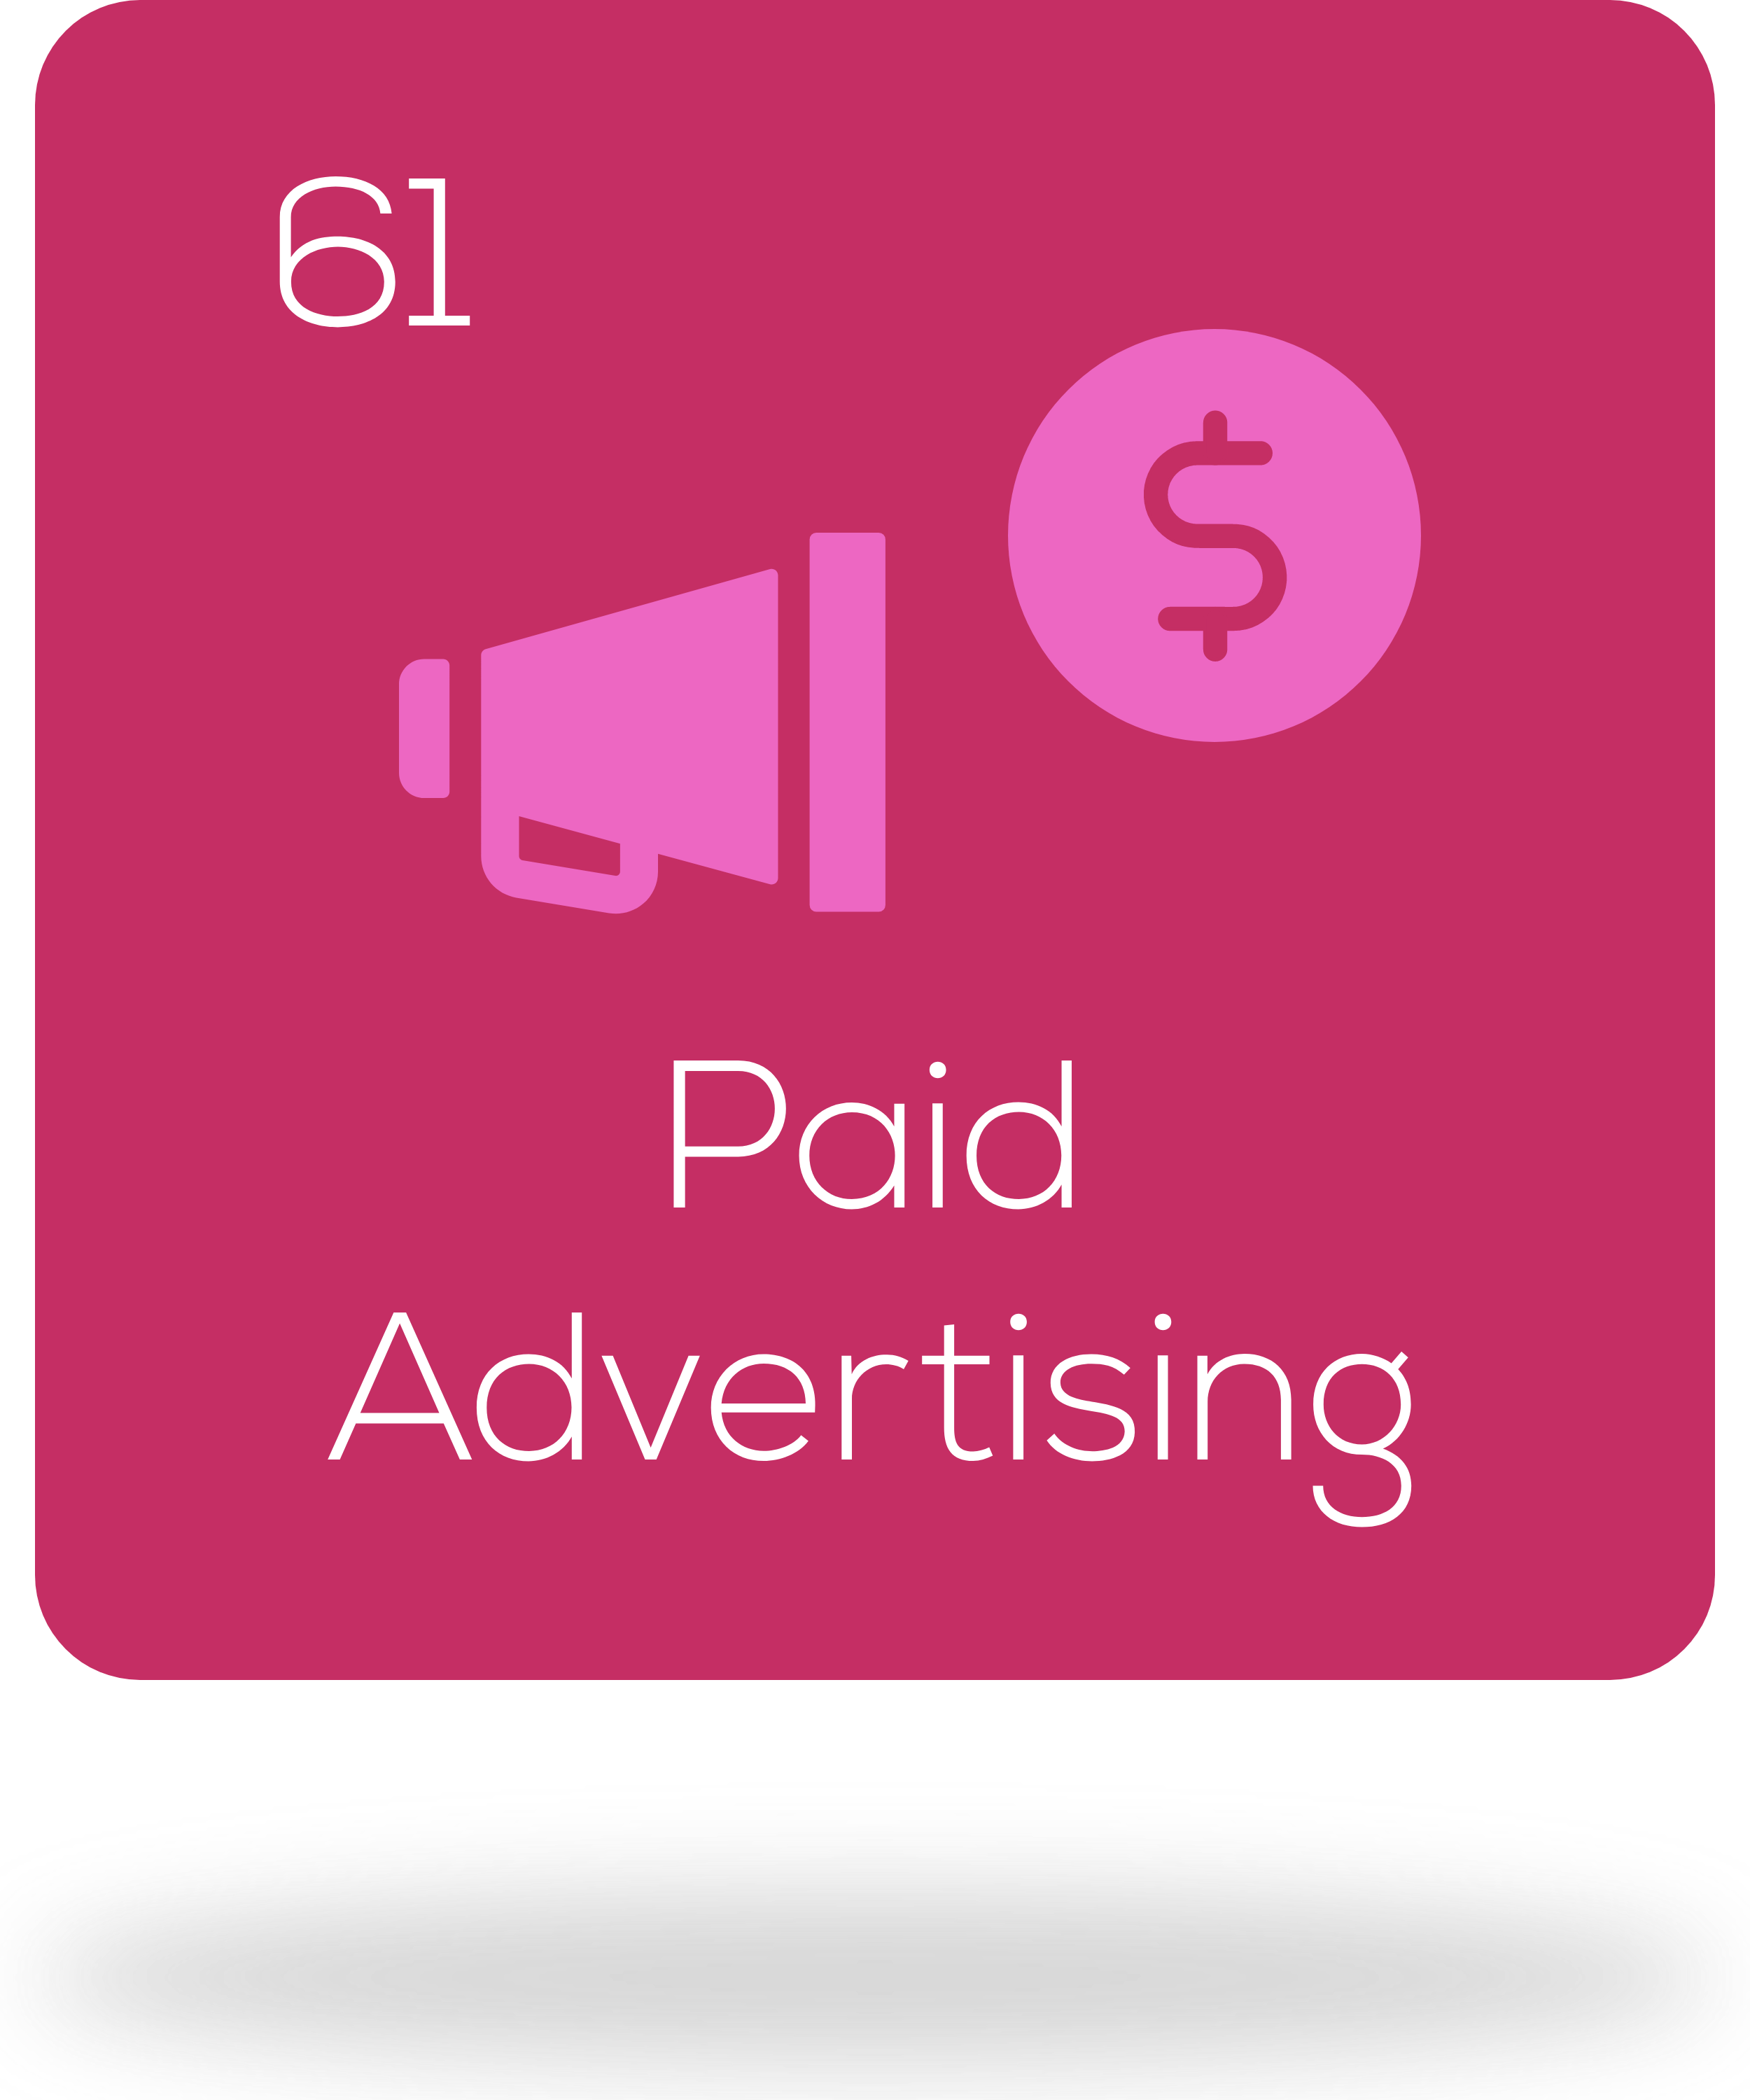 Paid advertising